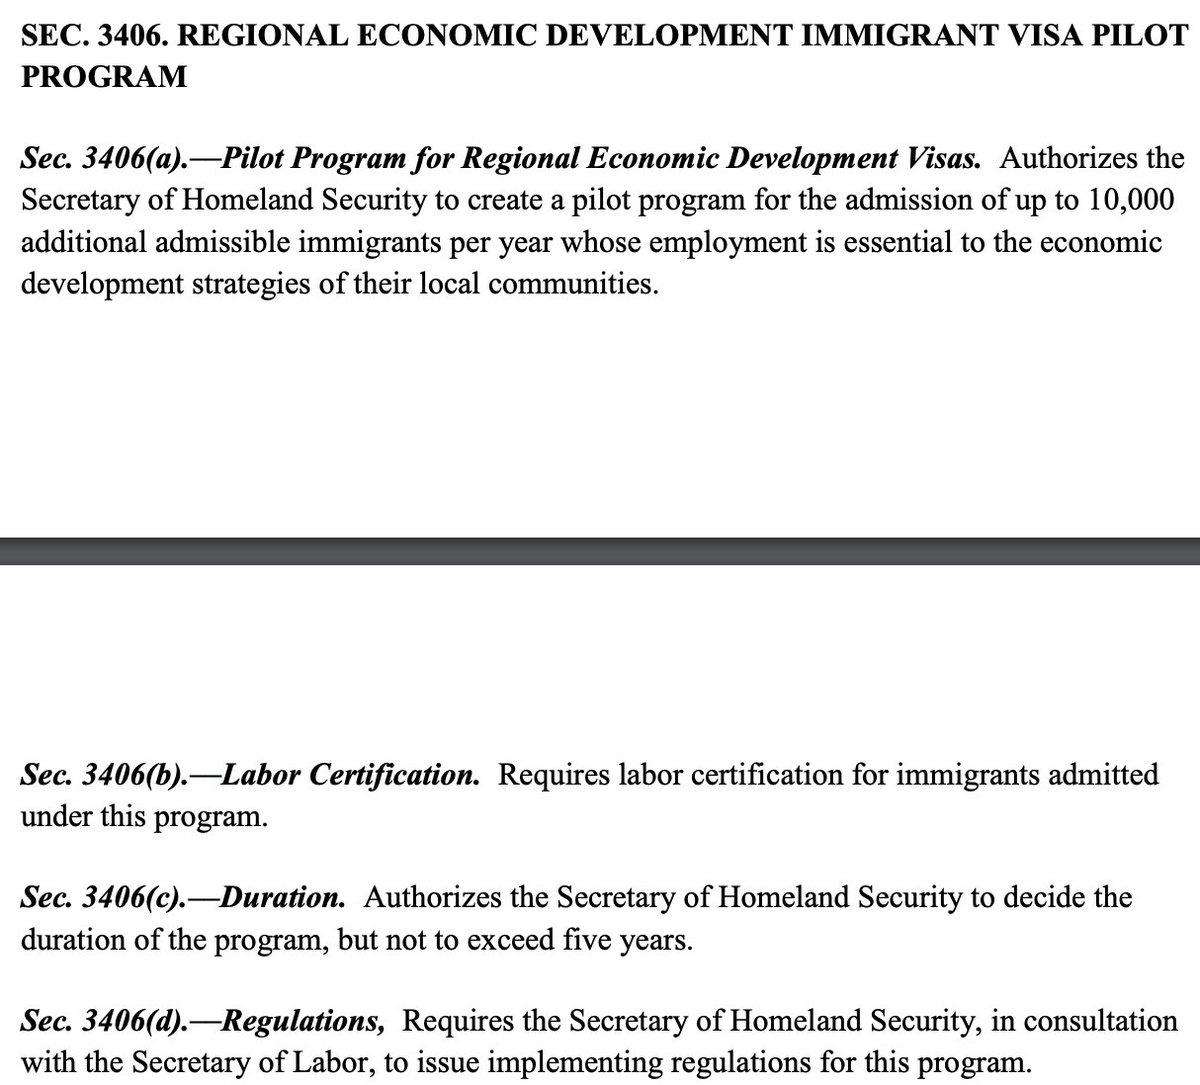 This is a nice nod to Cato's state-based visa idea, but it has almost no explanation of what this is. The cap makes it seem like it's an EB-5 spinoff. But it could be almost anything.